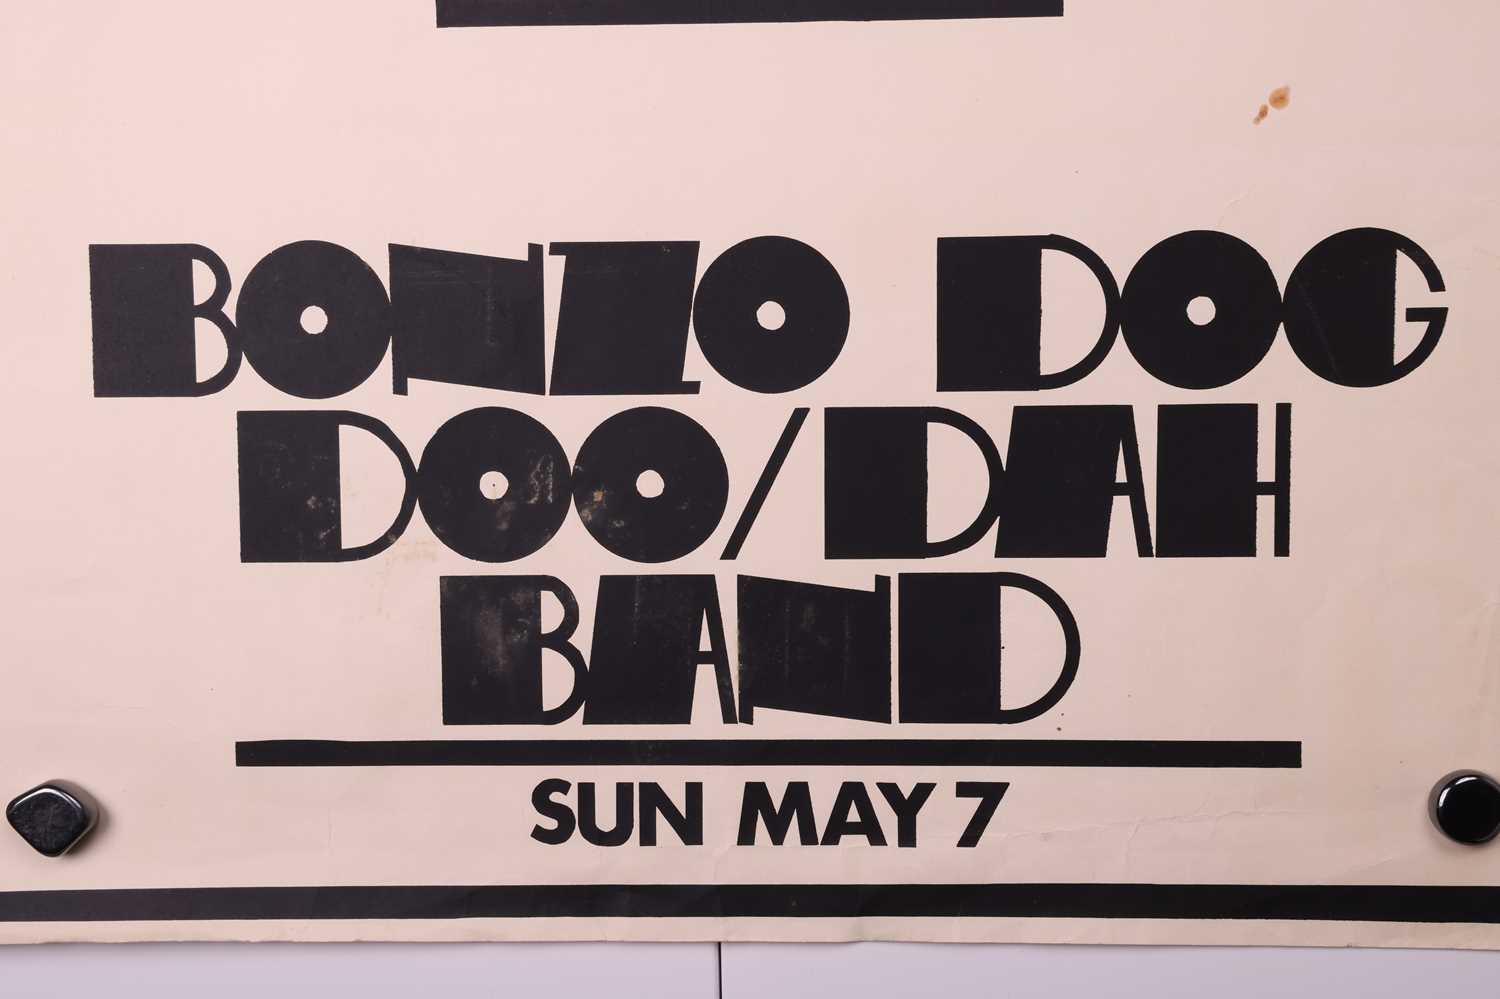 An original monochrome poster from the 1967 Bonzo Dog Doo-Dah Band concert at the Marquee (London), - Image 4 of 4